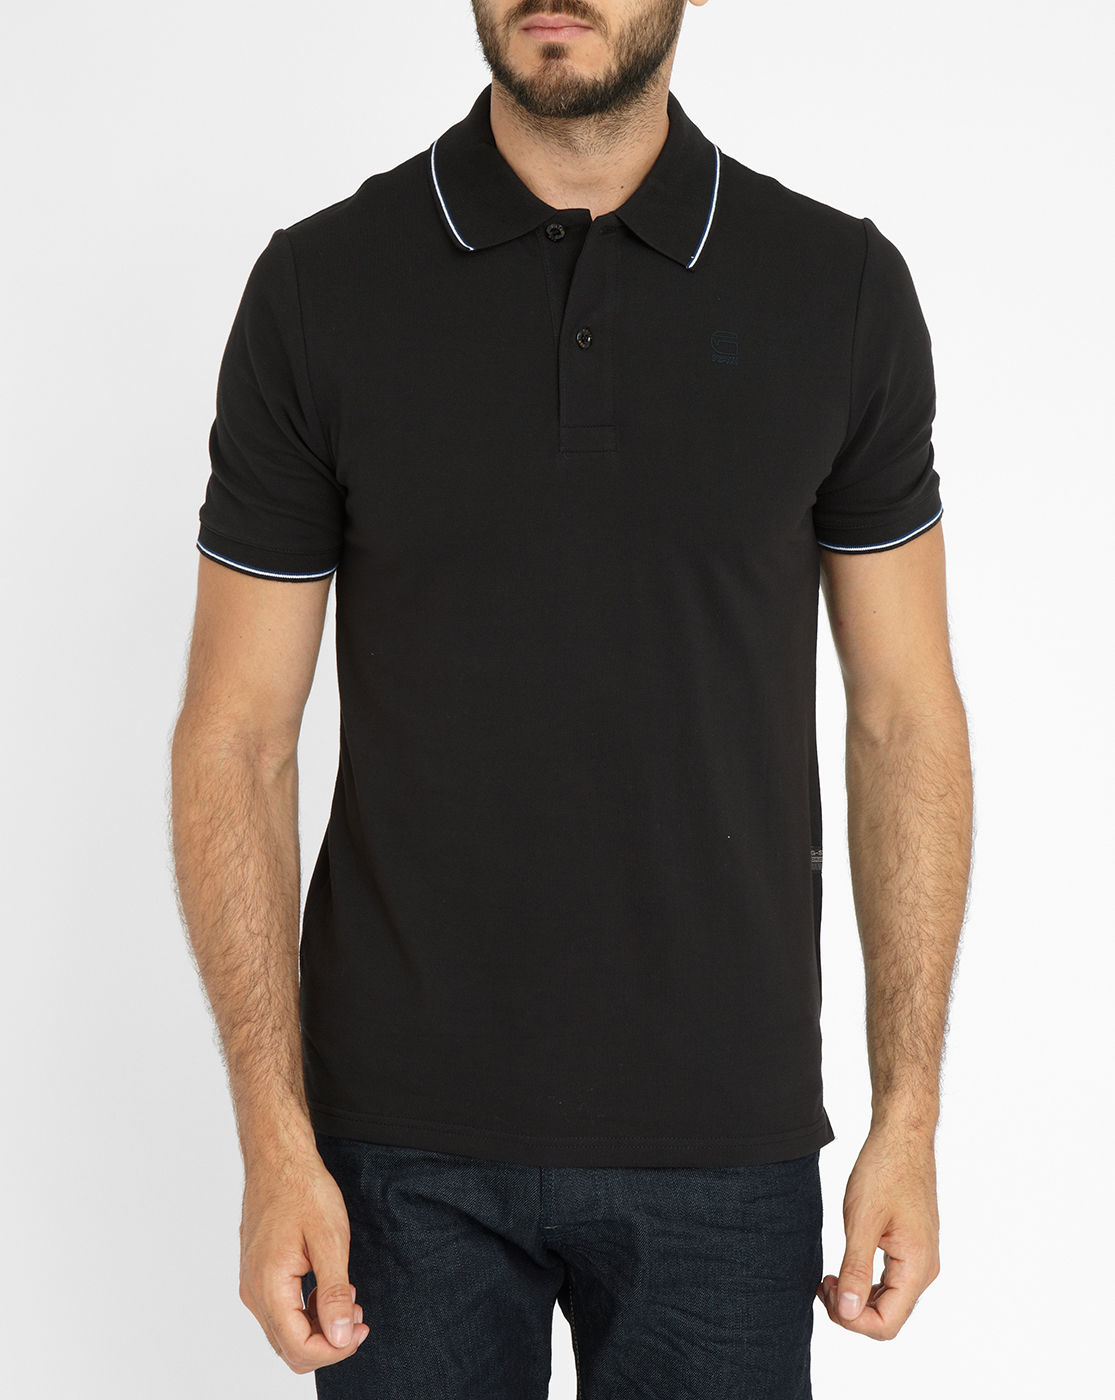 G-star raw Black Harm Short-sleeve Polo Shirt With White Trim Collar in ...